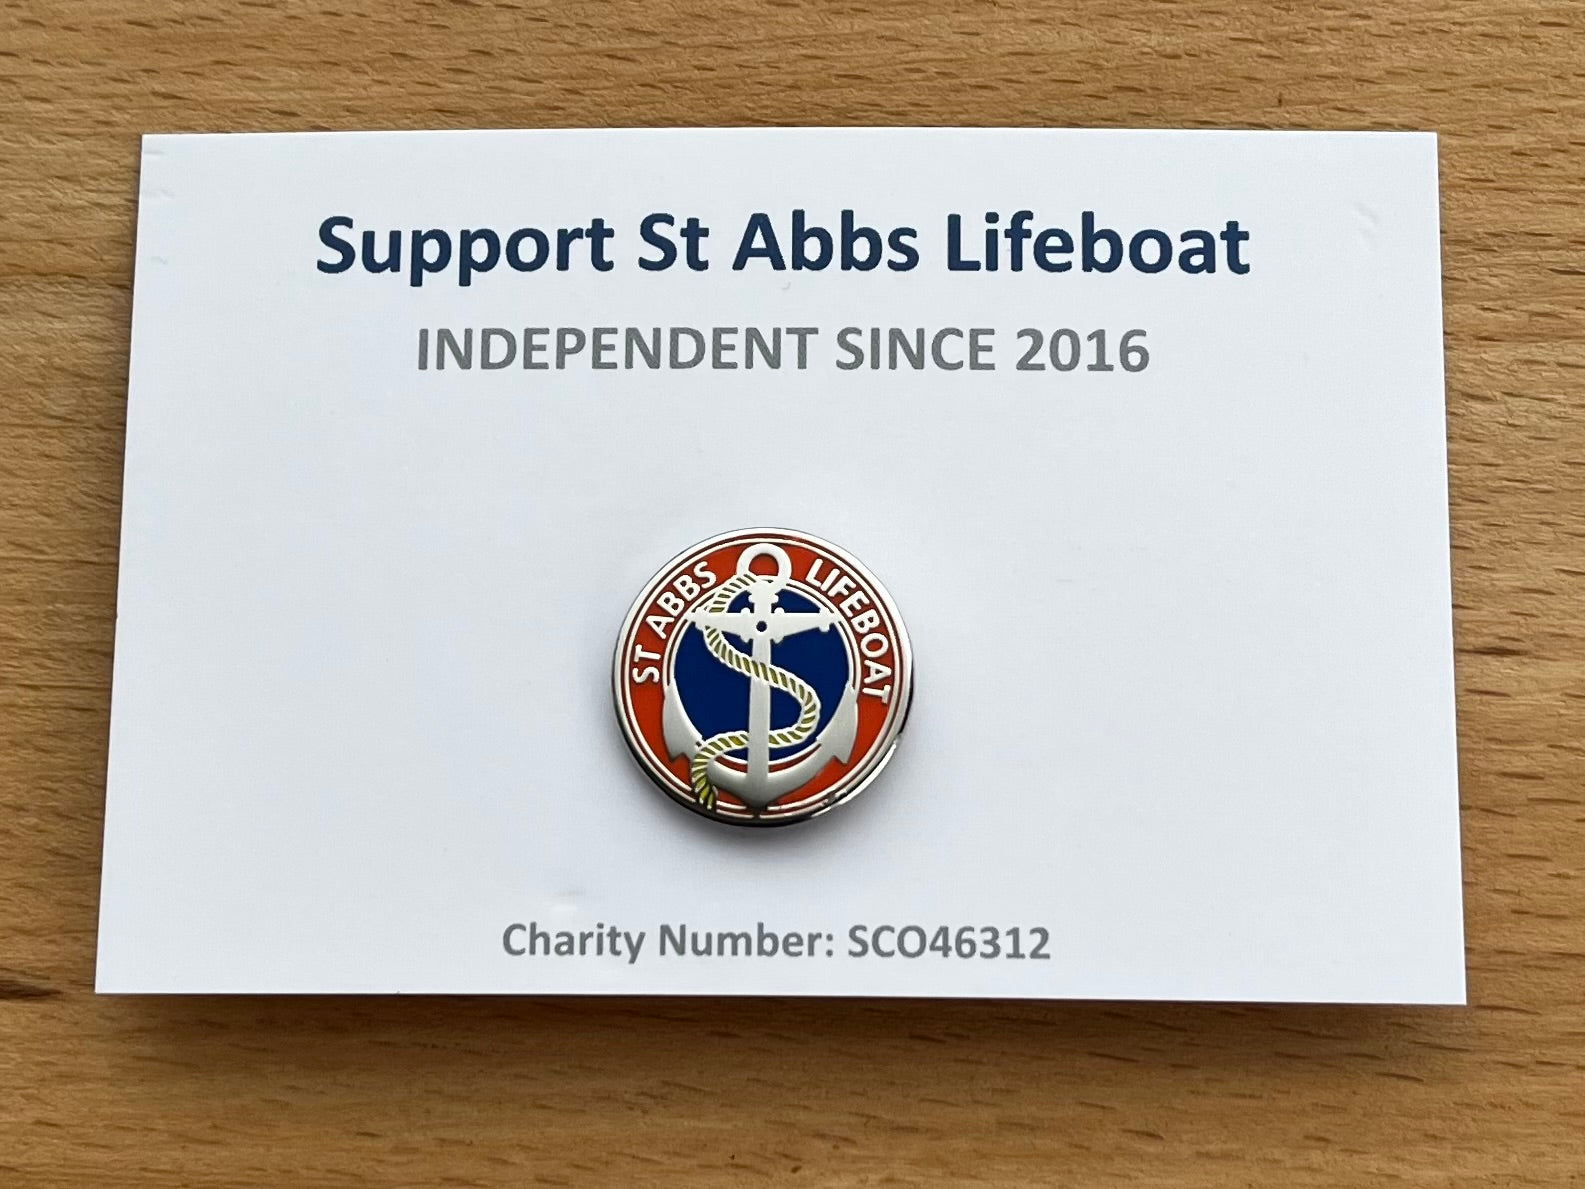 20mm Enamel badge featuring the official flag of St Abbs Lifeboat